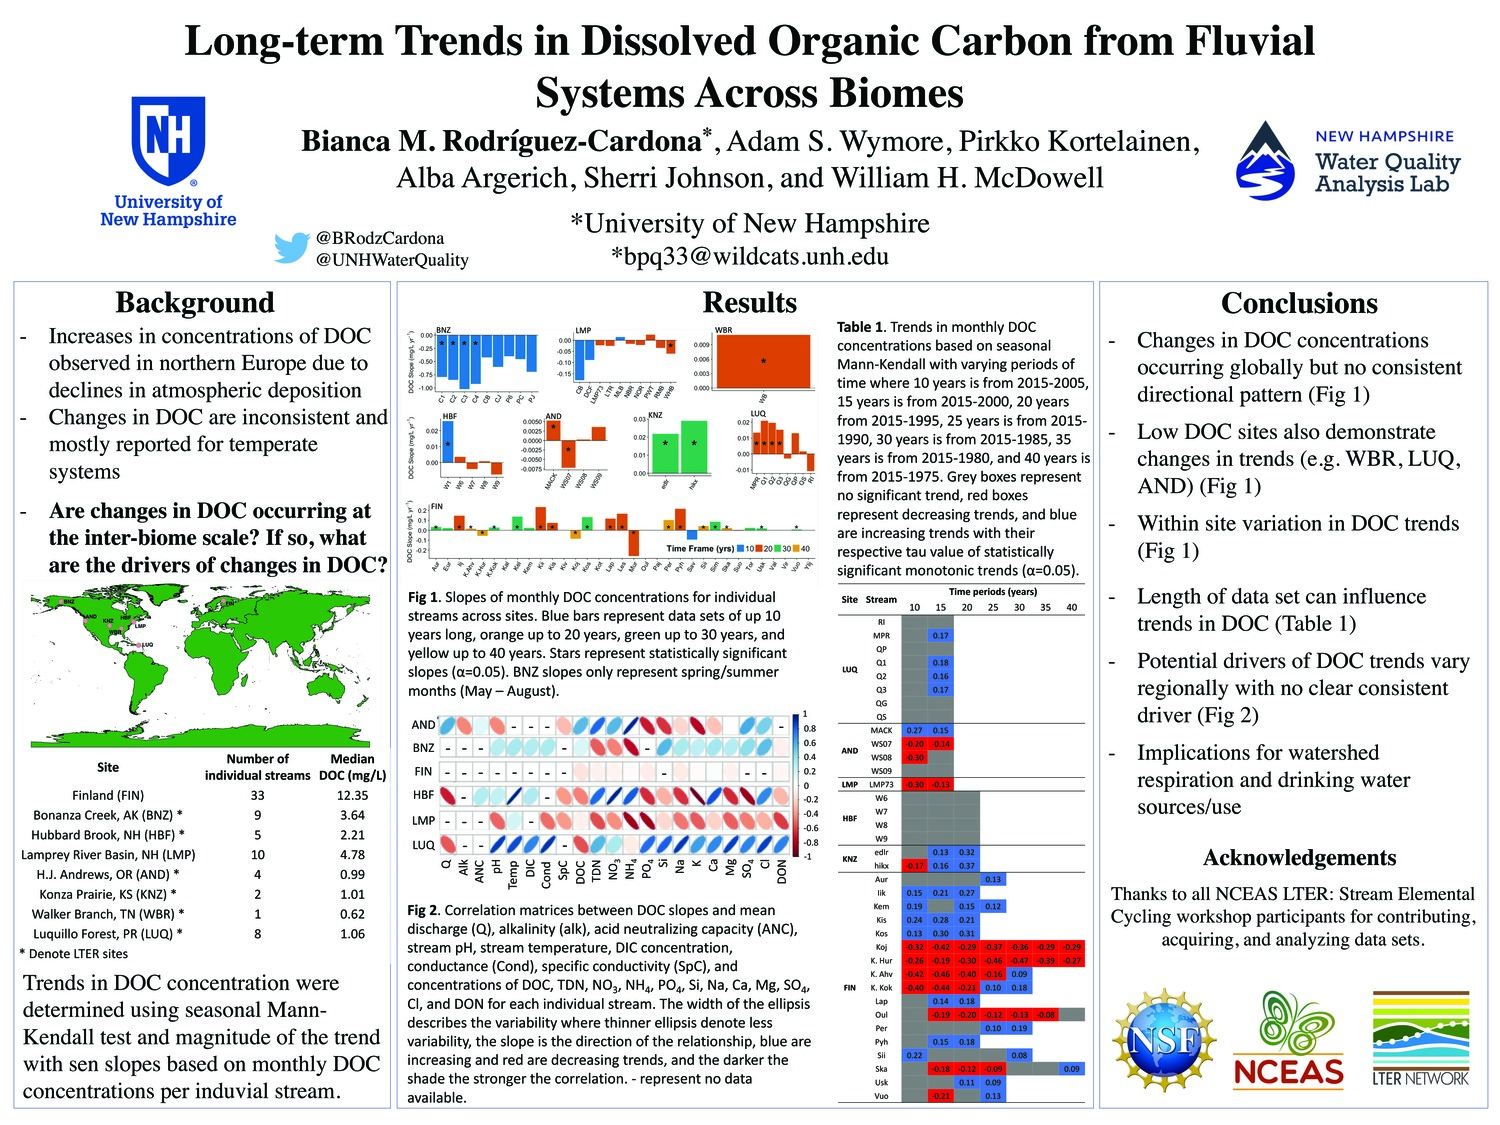 Long-Term Trends In Dissolved Organic Carbon From Fluvial Systems Across Biomes by bpq33